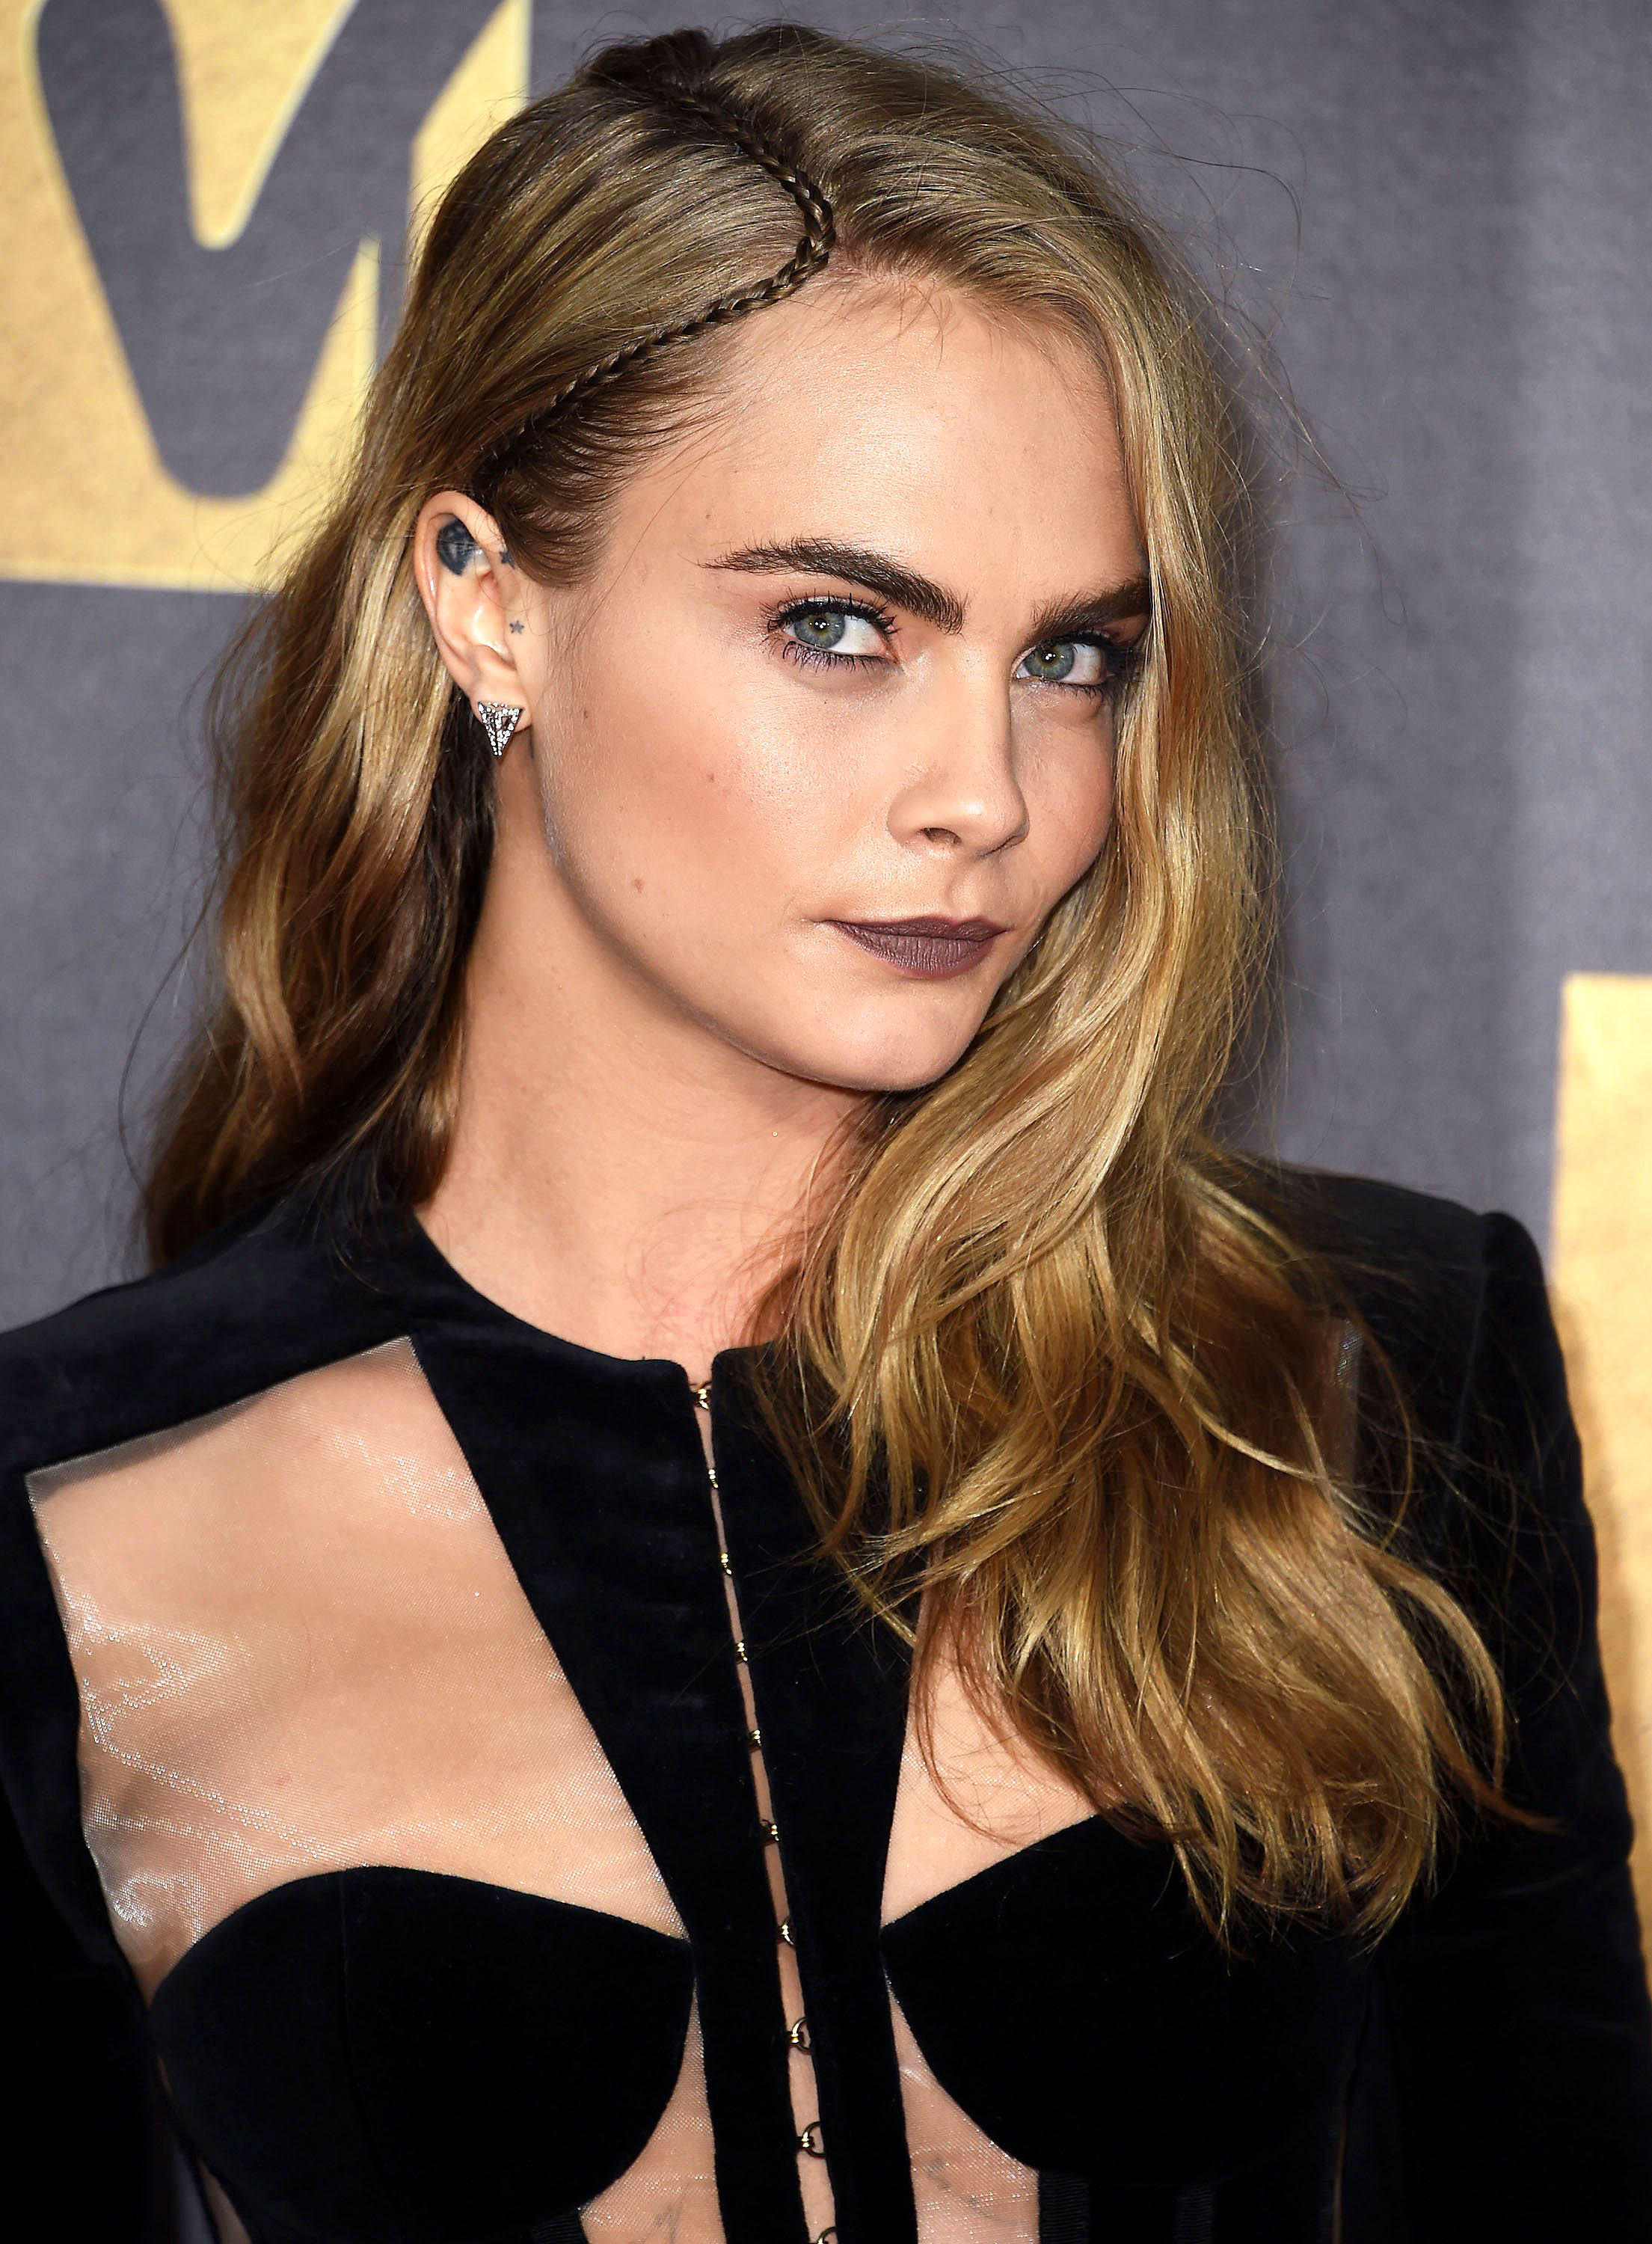 Cara Delevingne Cuts Her Blonde Hair: Before, After Photos